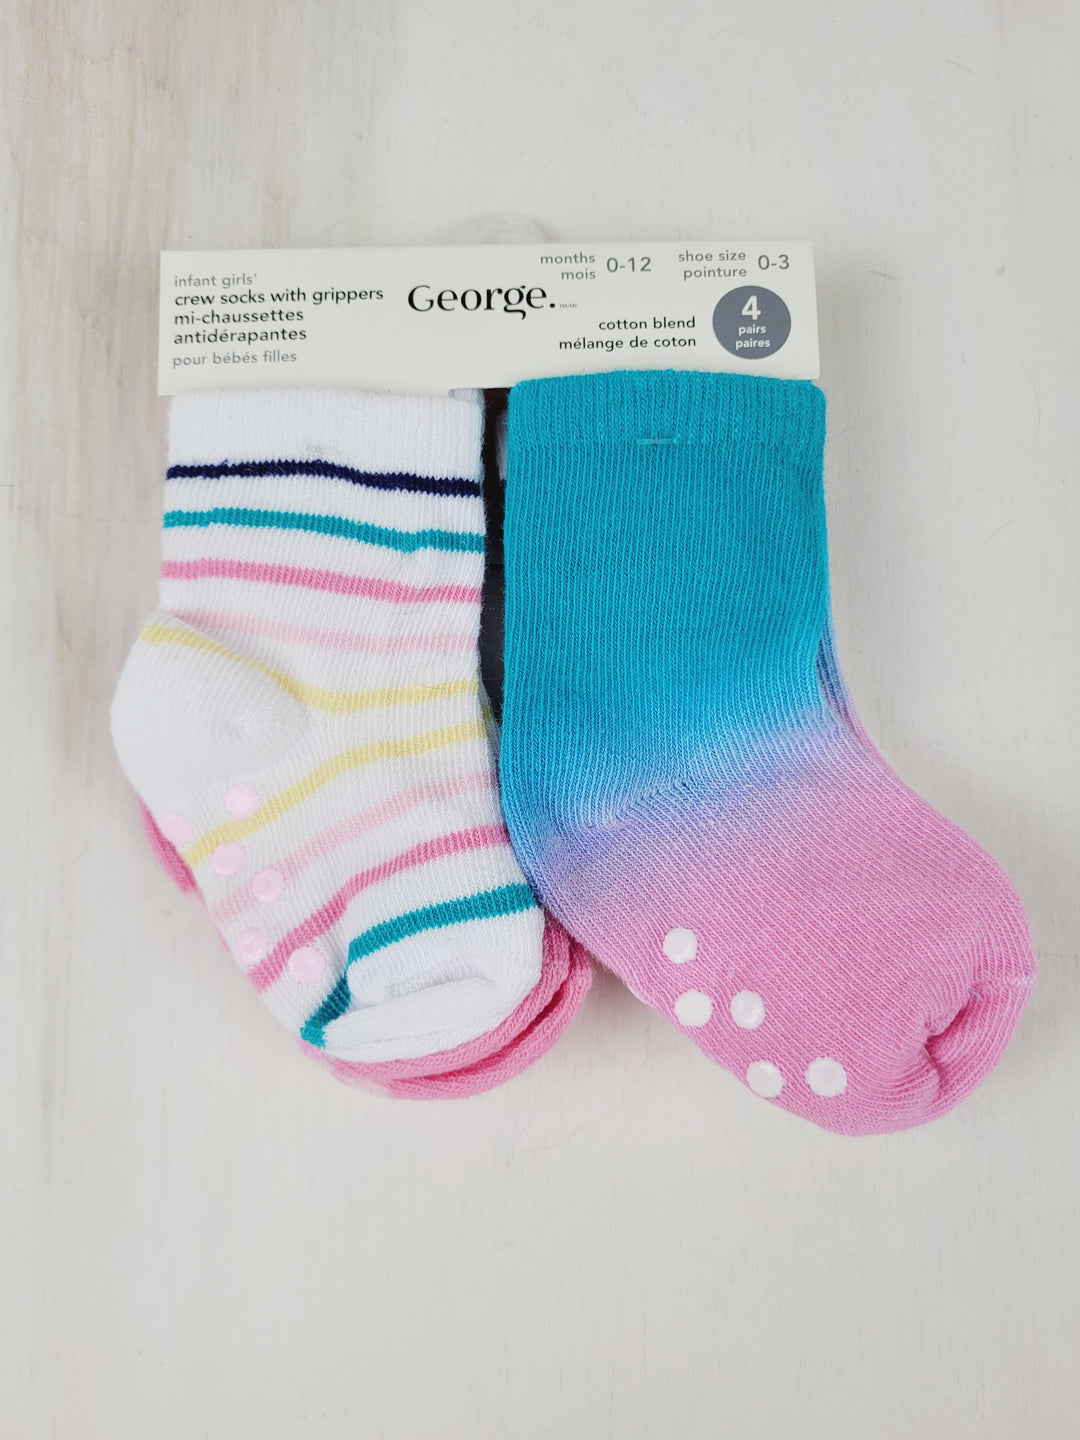 GEORGE 4 PACK SOCKS SIZE BABY 0-3 NEW!